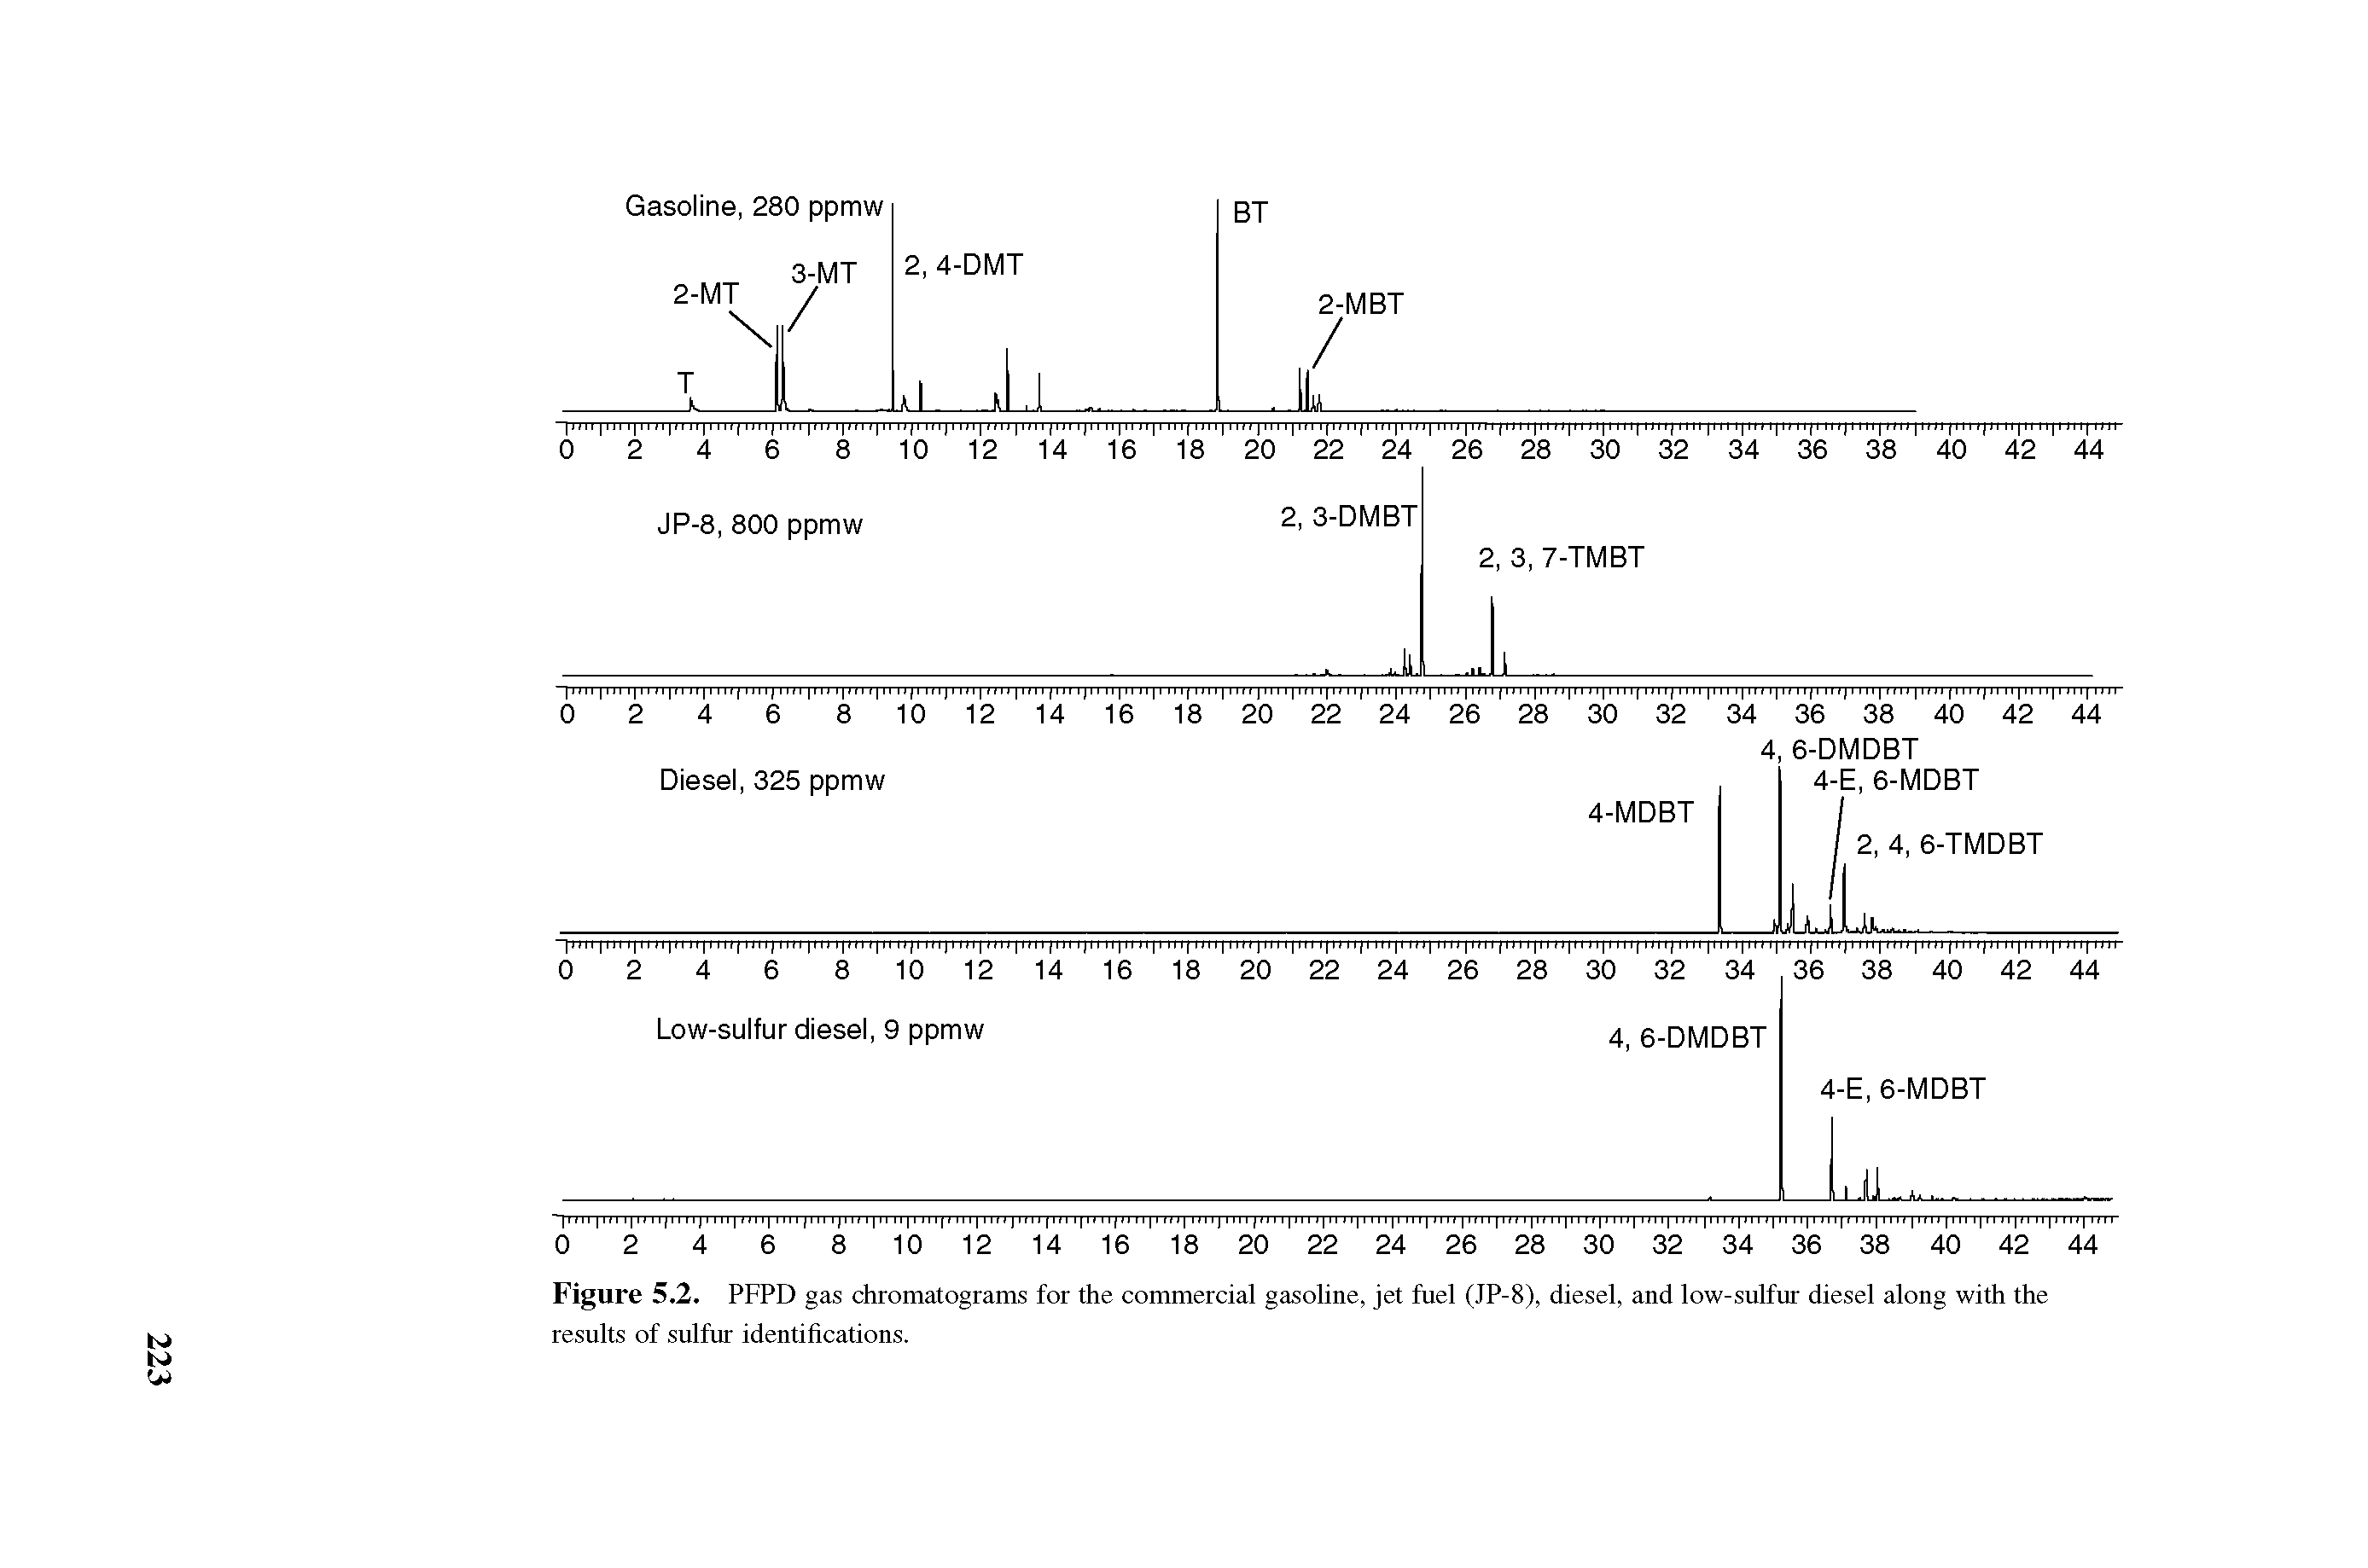 Figure 5.2. PFPD gas chromatograms for the commercial gasoline, jet fuel (JP-8), diesel, and low-sulfur diesel along with the results of sulfur identifications.